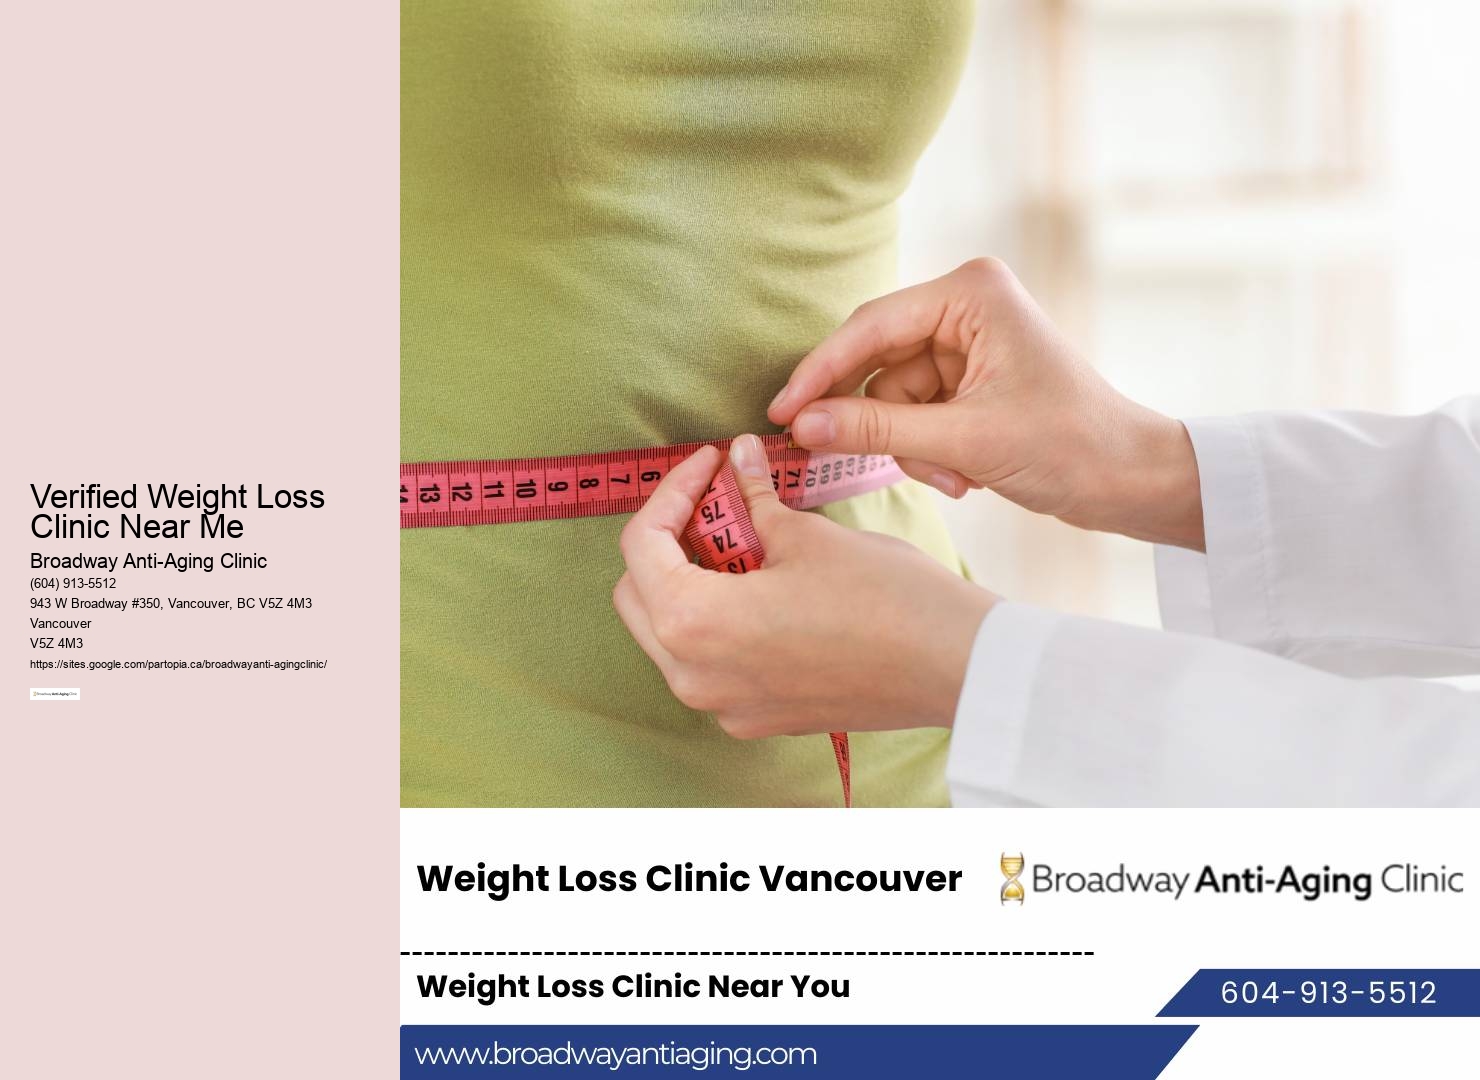 Vancouver Weight Loss Experts